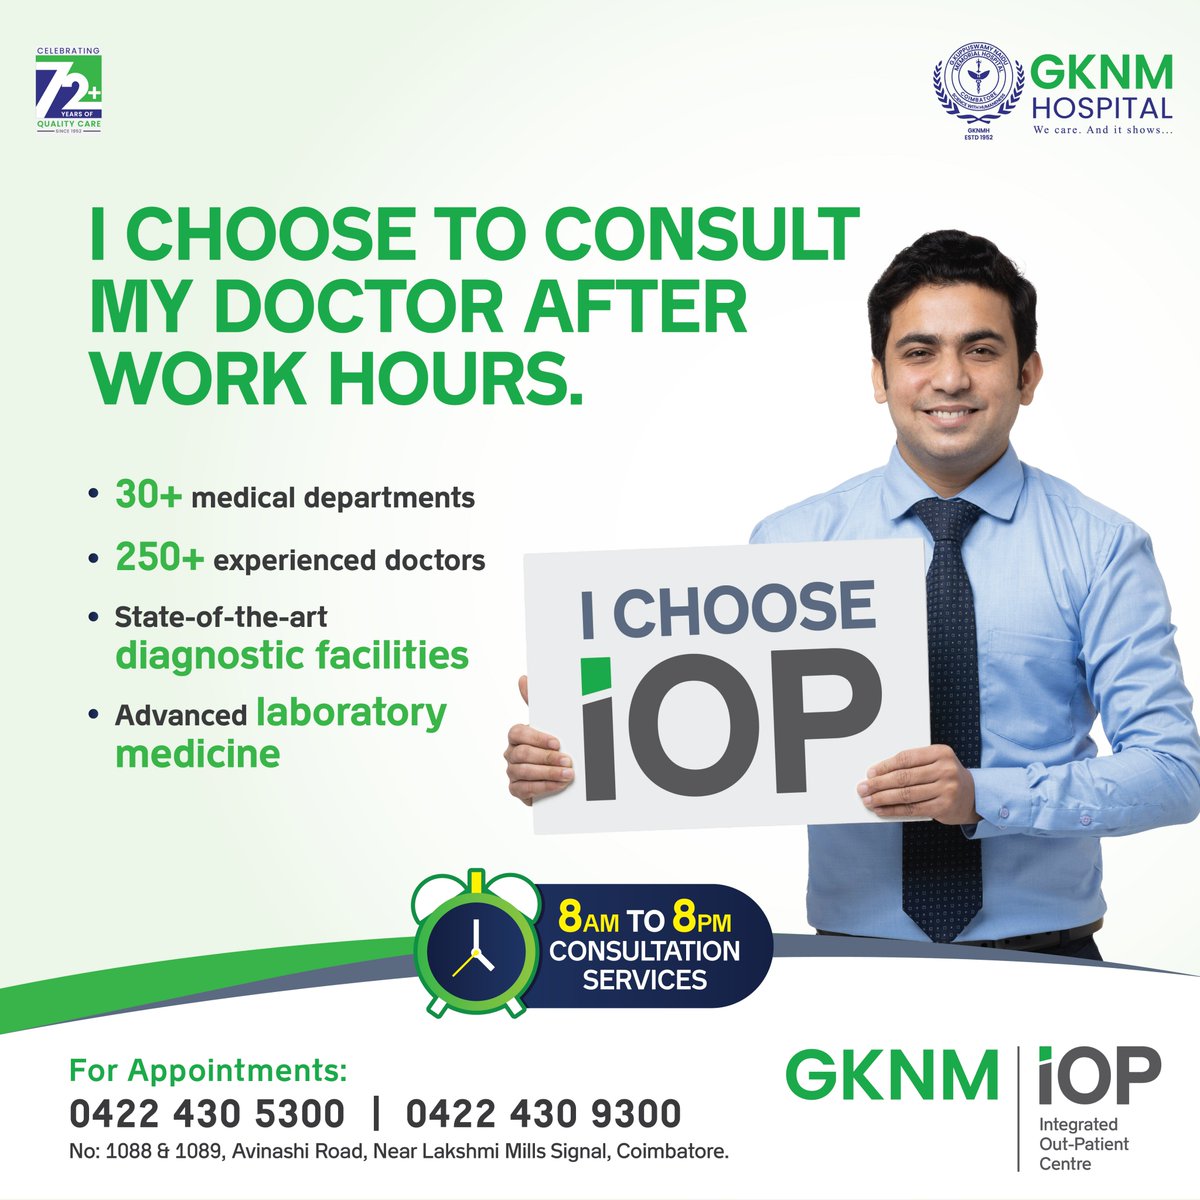 Busy with work and looking to consult your doctor after work hours? Worry not. GKNM iOP offers consultation services from 8 a.m. to 8 p.m. Your health is our utmost priority. Choose GKNM iOP! To Know More - gknmhospital.org/iop/ \ 0422 430 5300 / 0422 430 9300 #GKNM #GKNMiOP